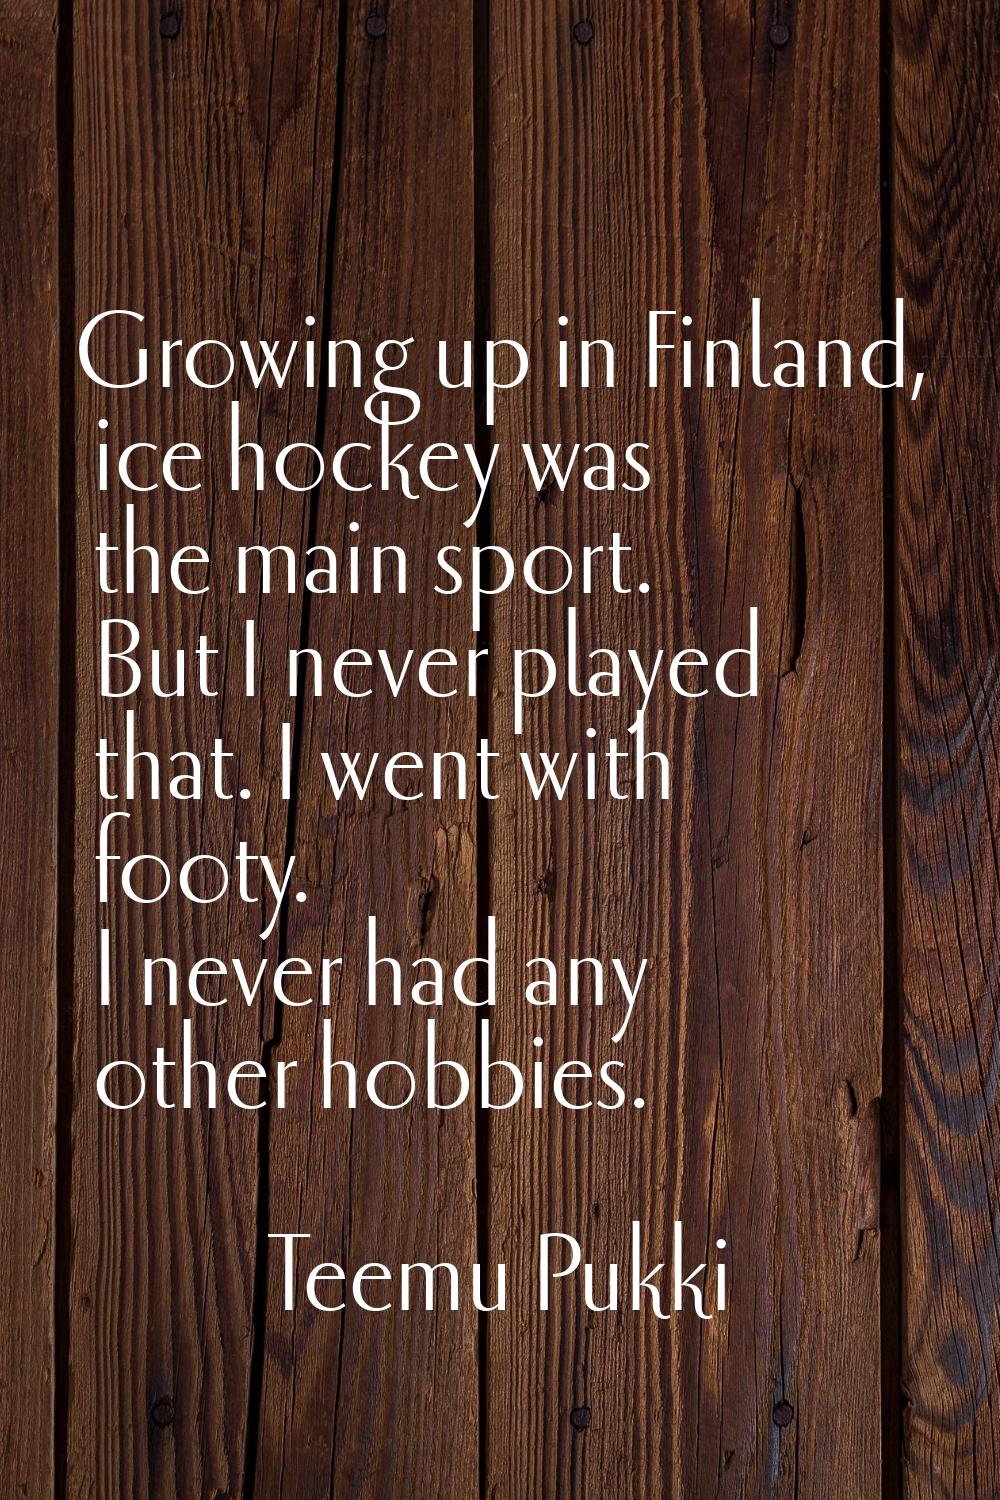 Growing up in Finland, ice hockey was the main sport. But I never played that. I went with footy. I